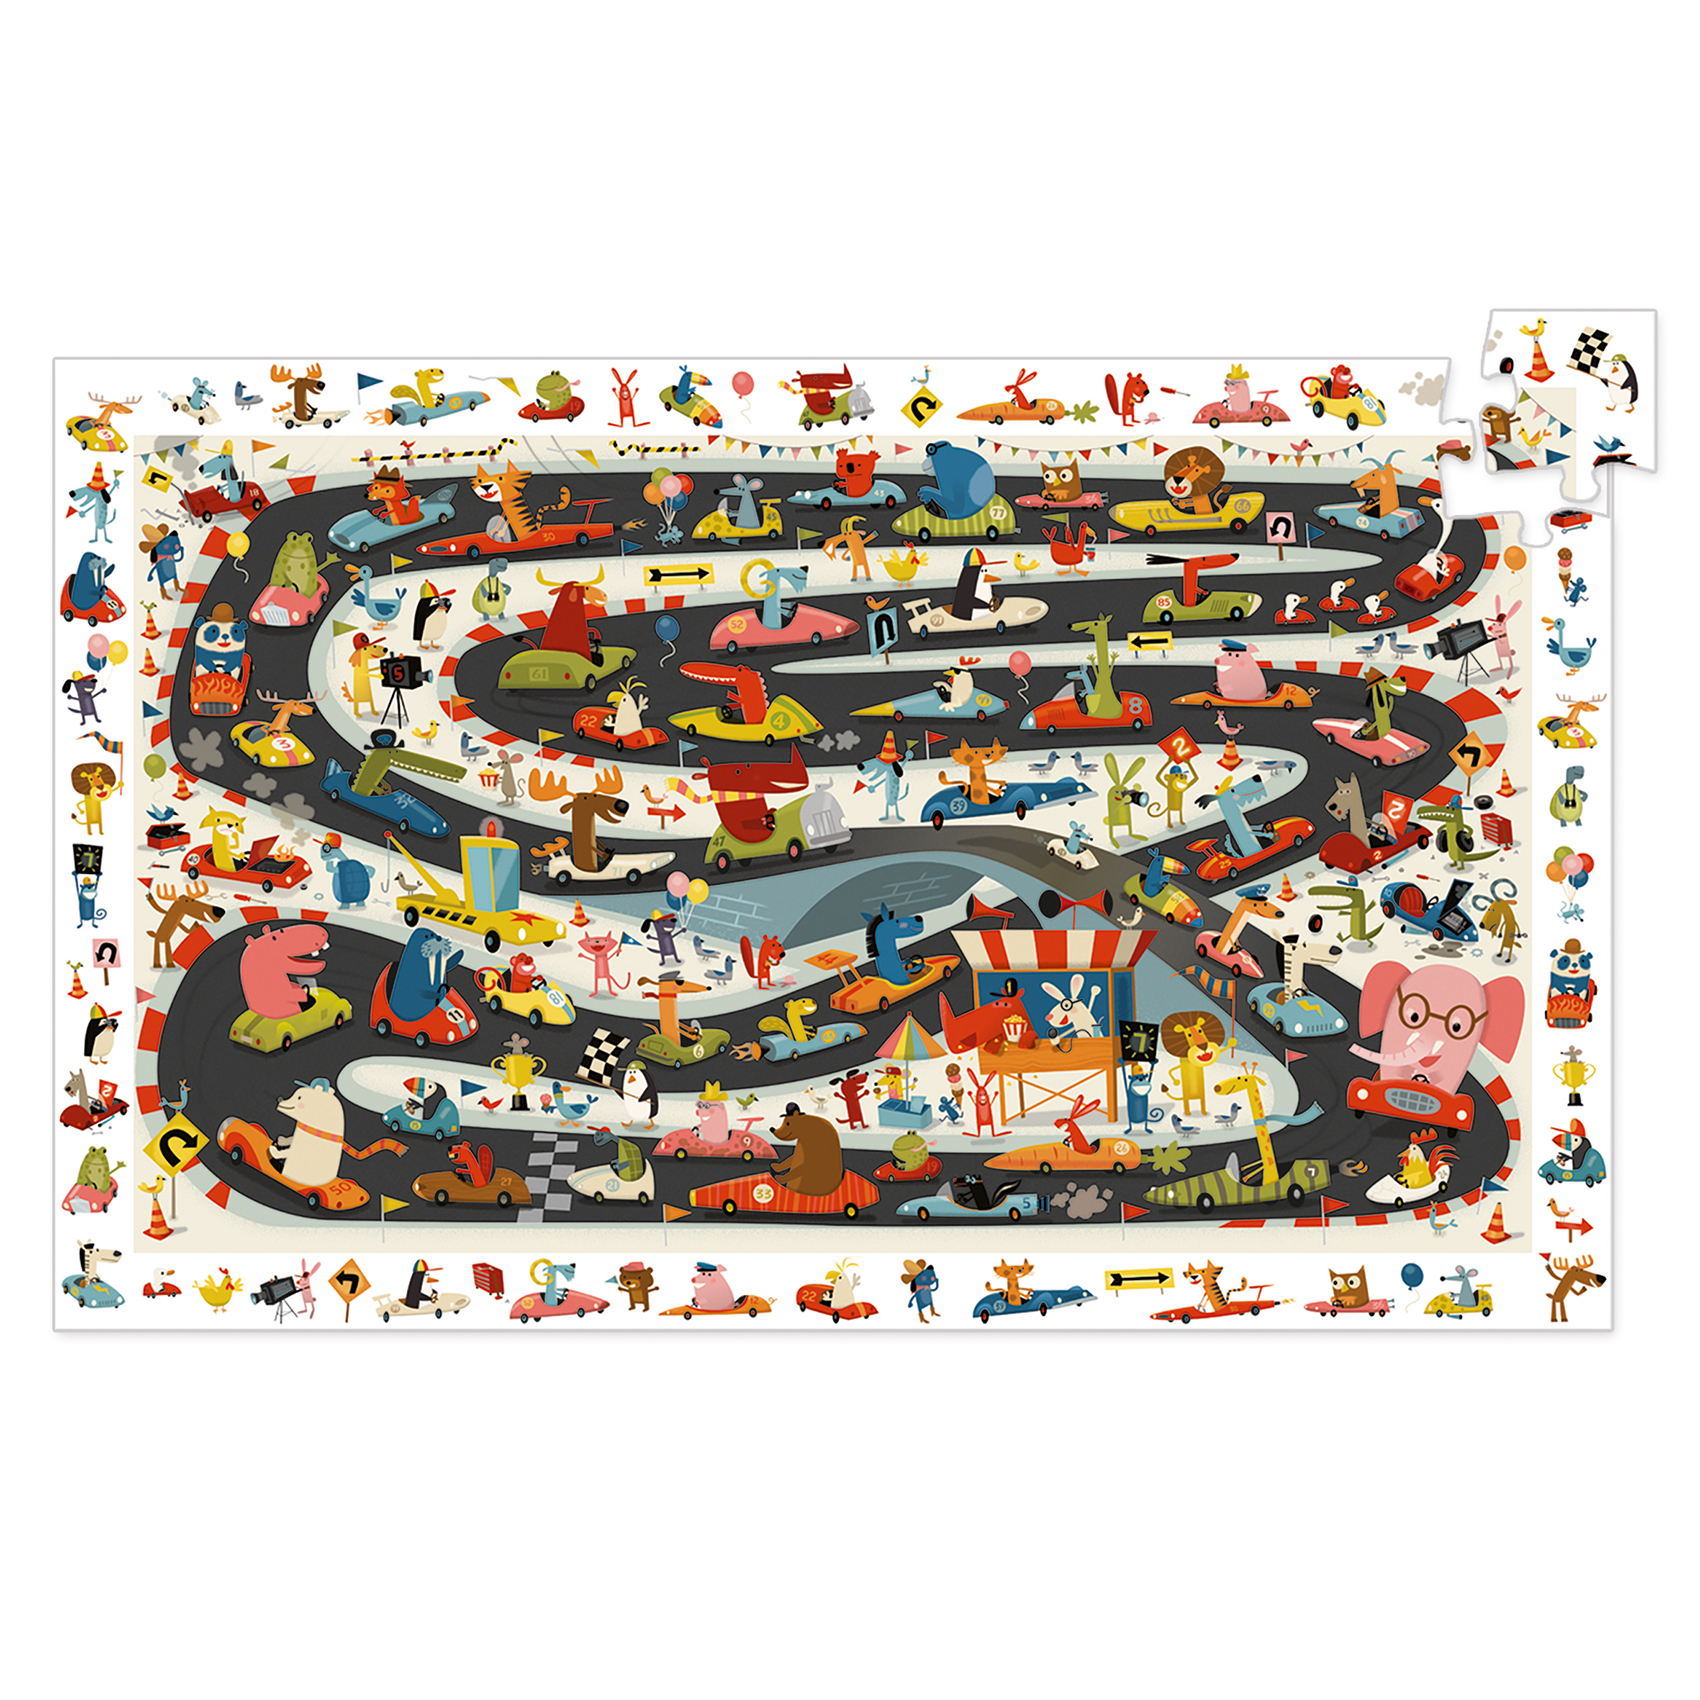 car rally observation puzzle by Djeco